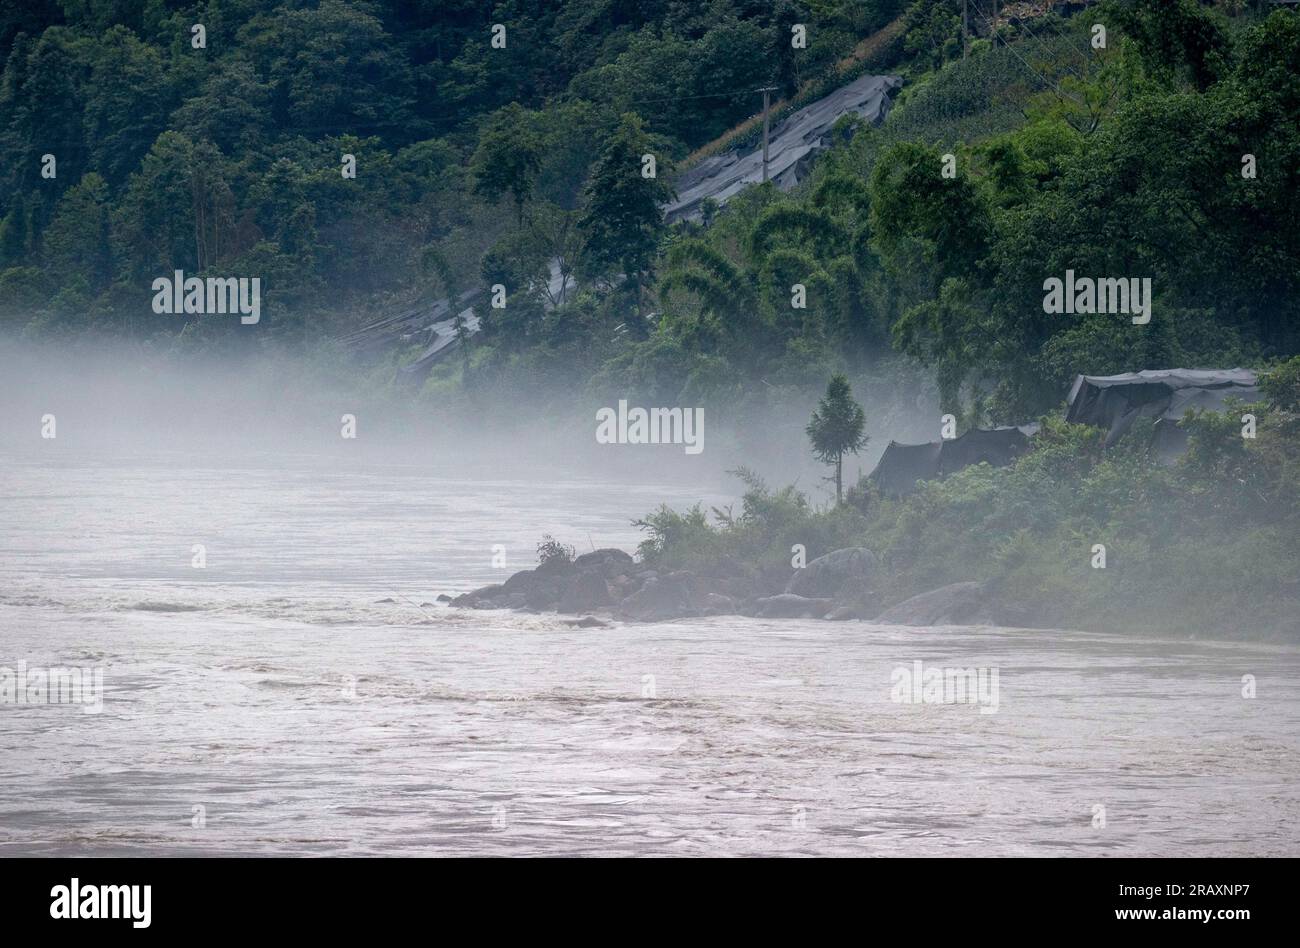 Gongshan. 4th July, 2023. This photo taken on July 4, 2023 shows the scenery of the Nujiang River in Nujiang Lisu Autonomous Prefecture, southwest China's Yunnan Province. Credit: Yang Zhisen/Xinhua/Alamy Live News Stock Photo